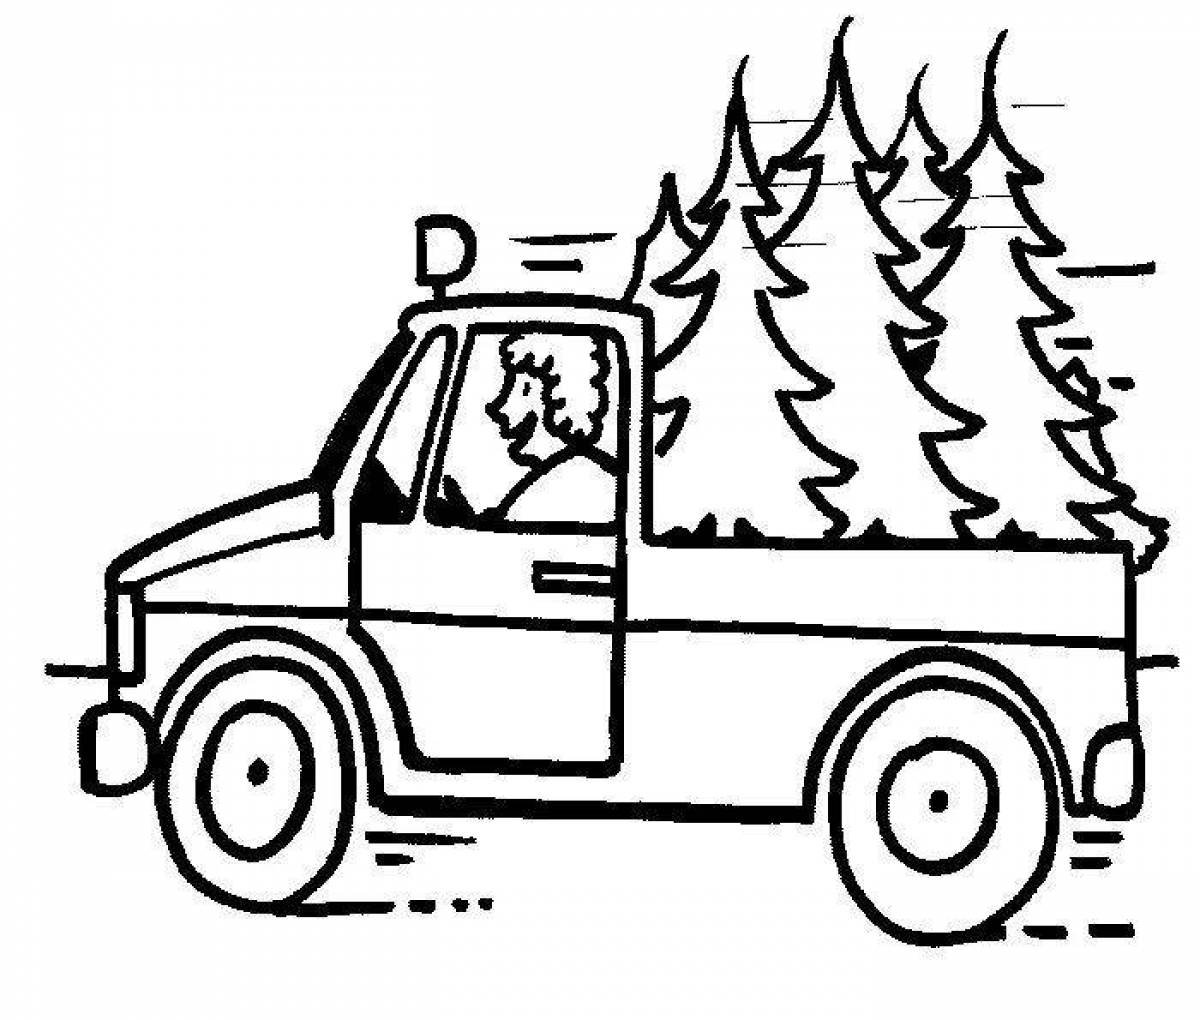 Merry Christmas car coloring page